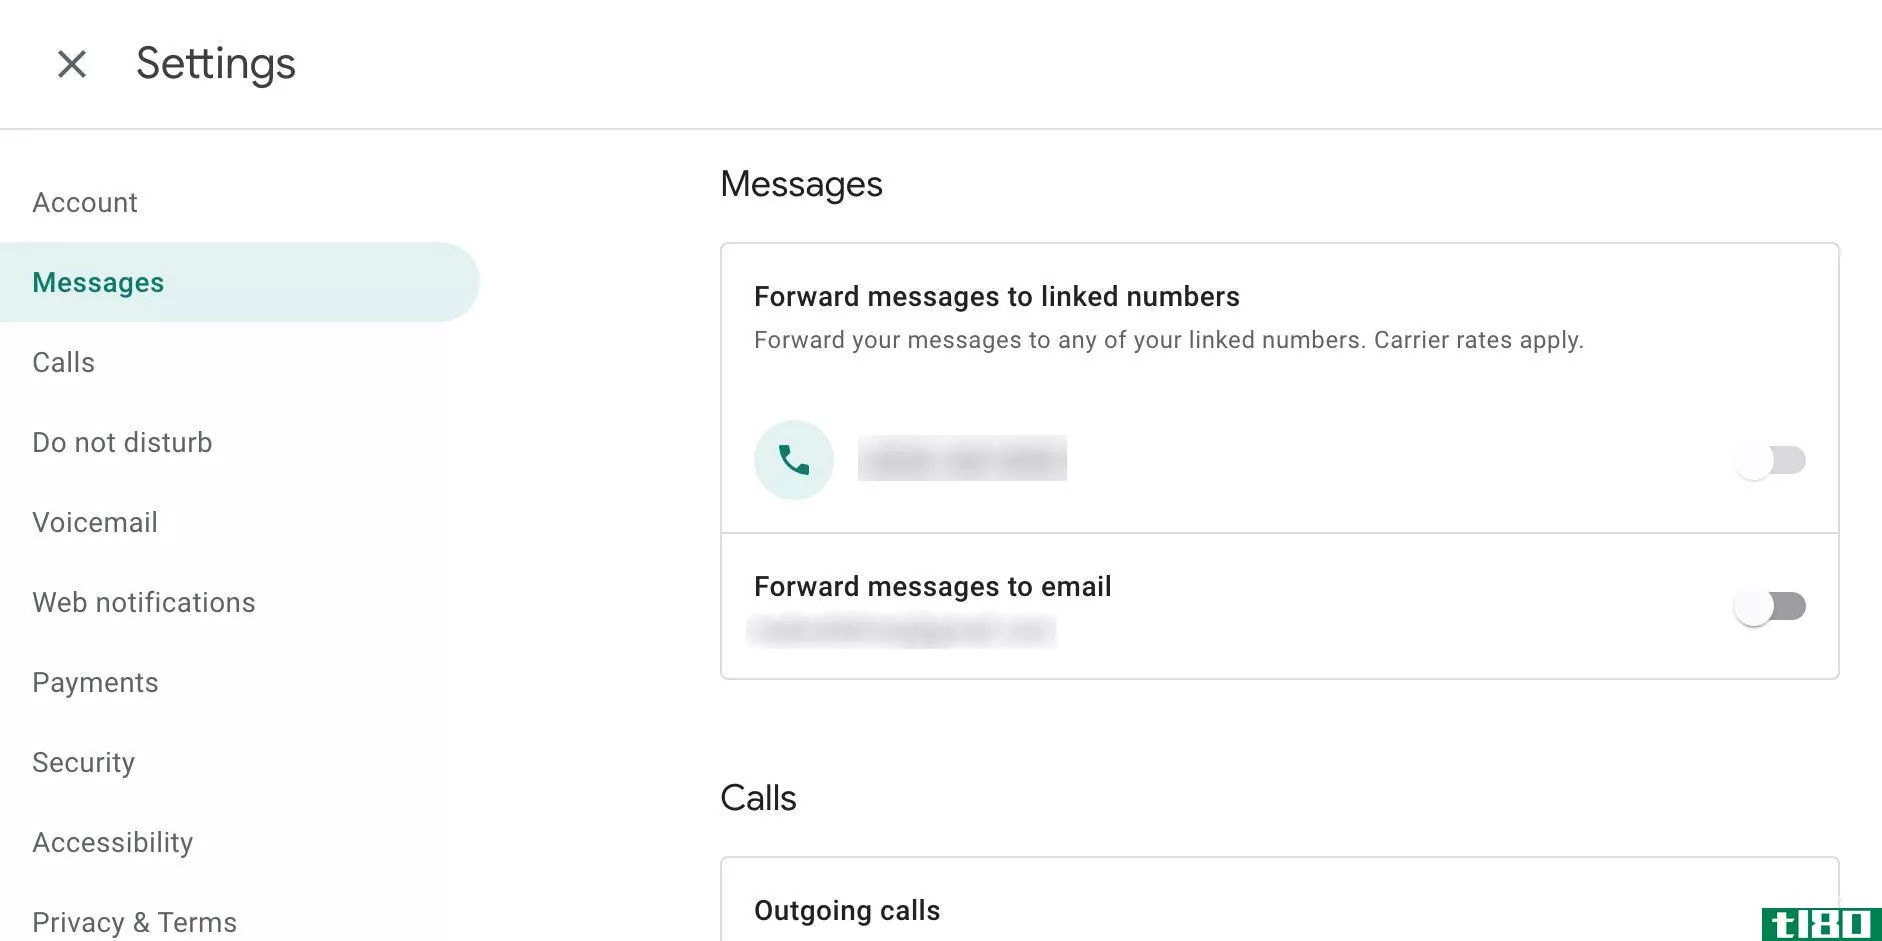 Enable forwarding messages to email in Google Voice